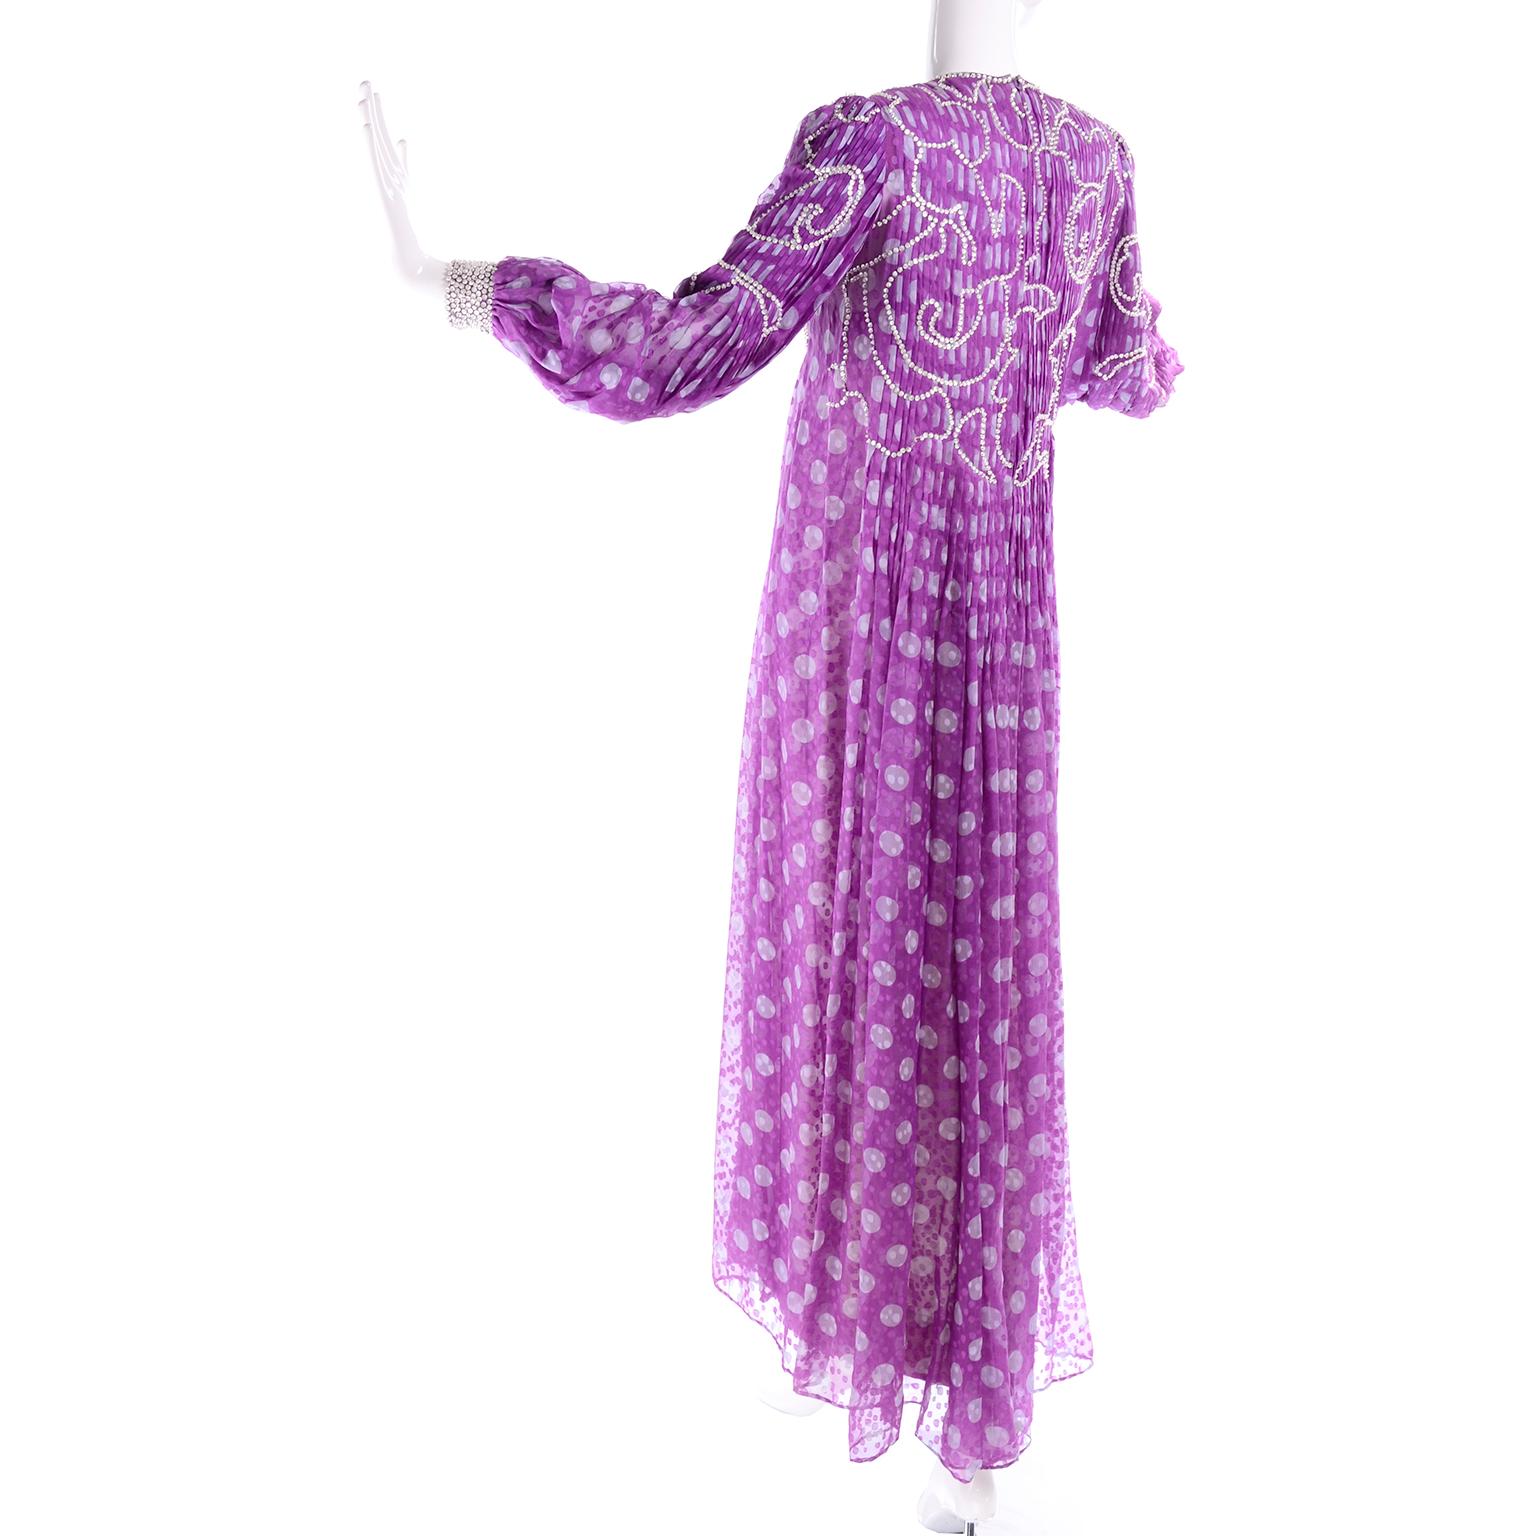 This is a sensational rare vintage James Galanos purple polka dot silk chiffon dress with silver beaded sequins and heavy pleats. The long sleeve semi sheer over dress has knife pleating held in place by swirling lines of sewn-in beads through